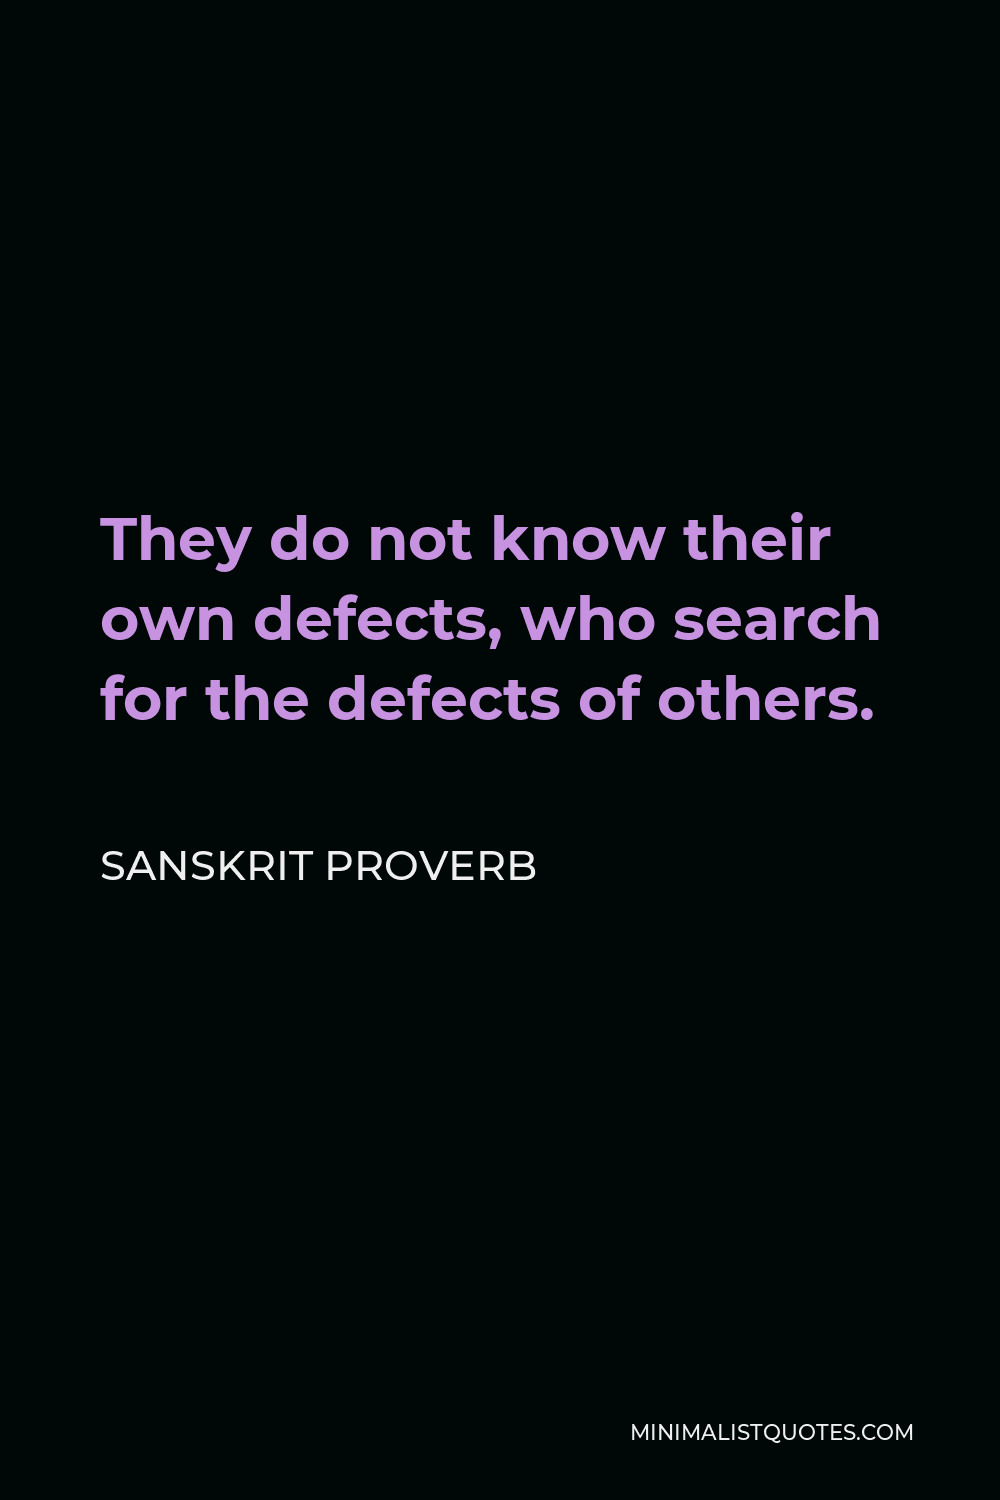 Sanskrit Proverb Quote - They do not know their own defects, who search for the defects of others.